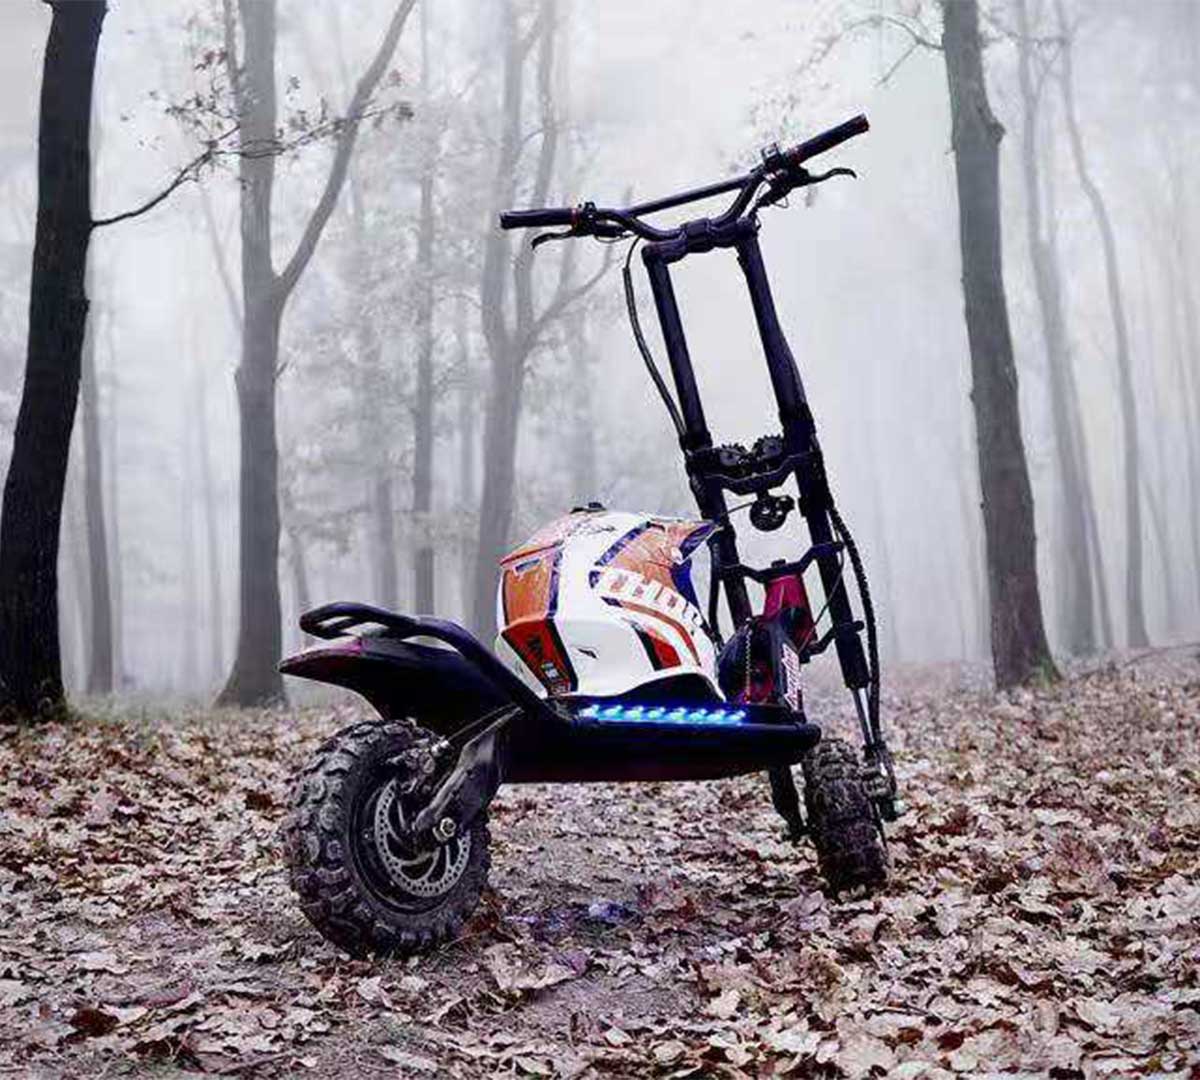 An all-terrain electric scooter with robust tires stands amidst a leaf-strewn forest floor, showcasing the adaptability required for handling electric scooters in the challenges of winter conditions.